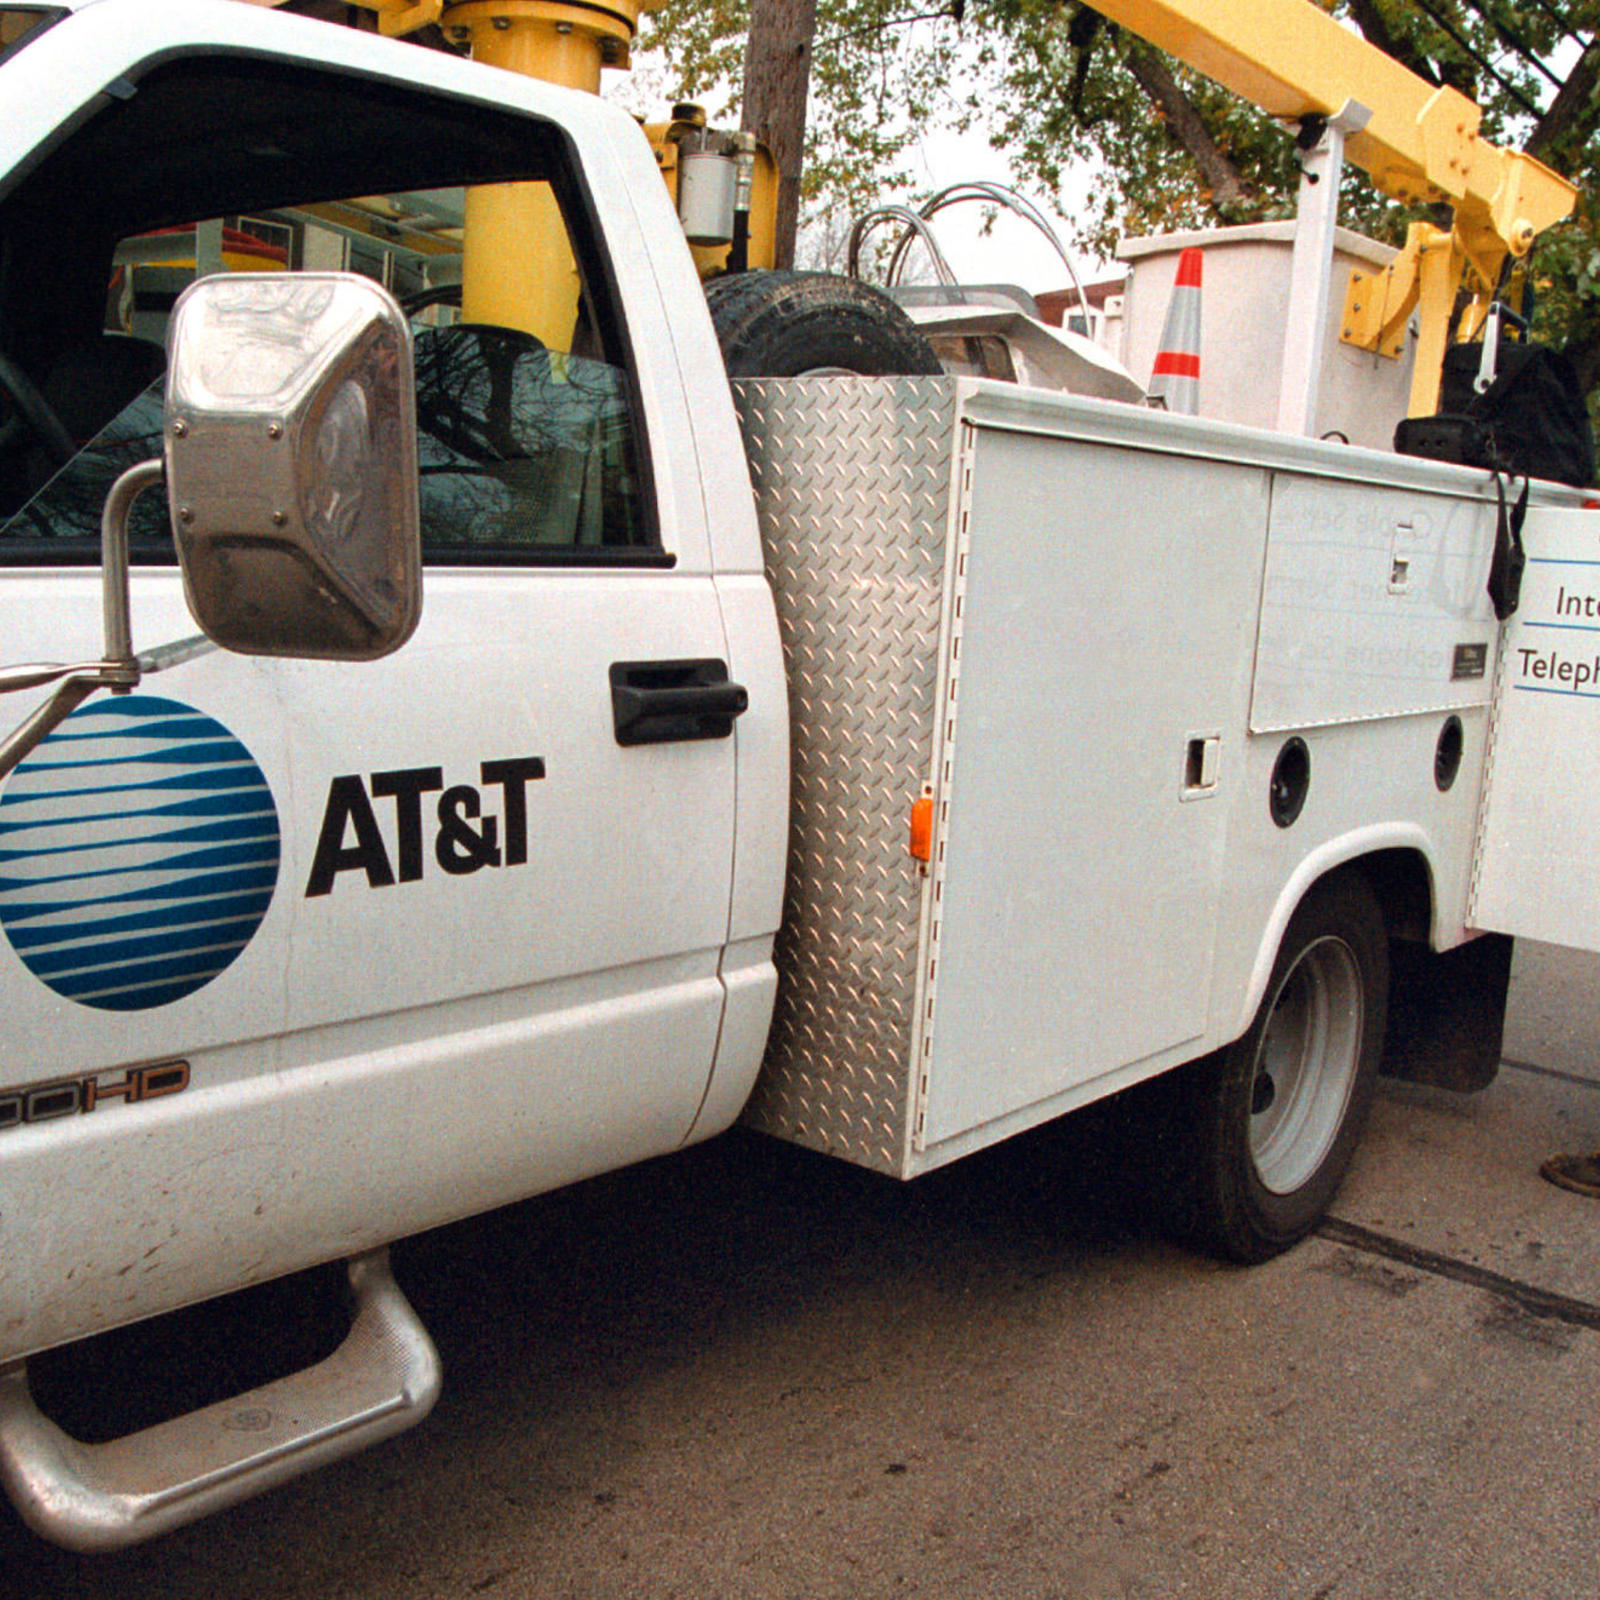 what customers should know about at&t's massive data breach